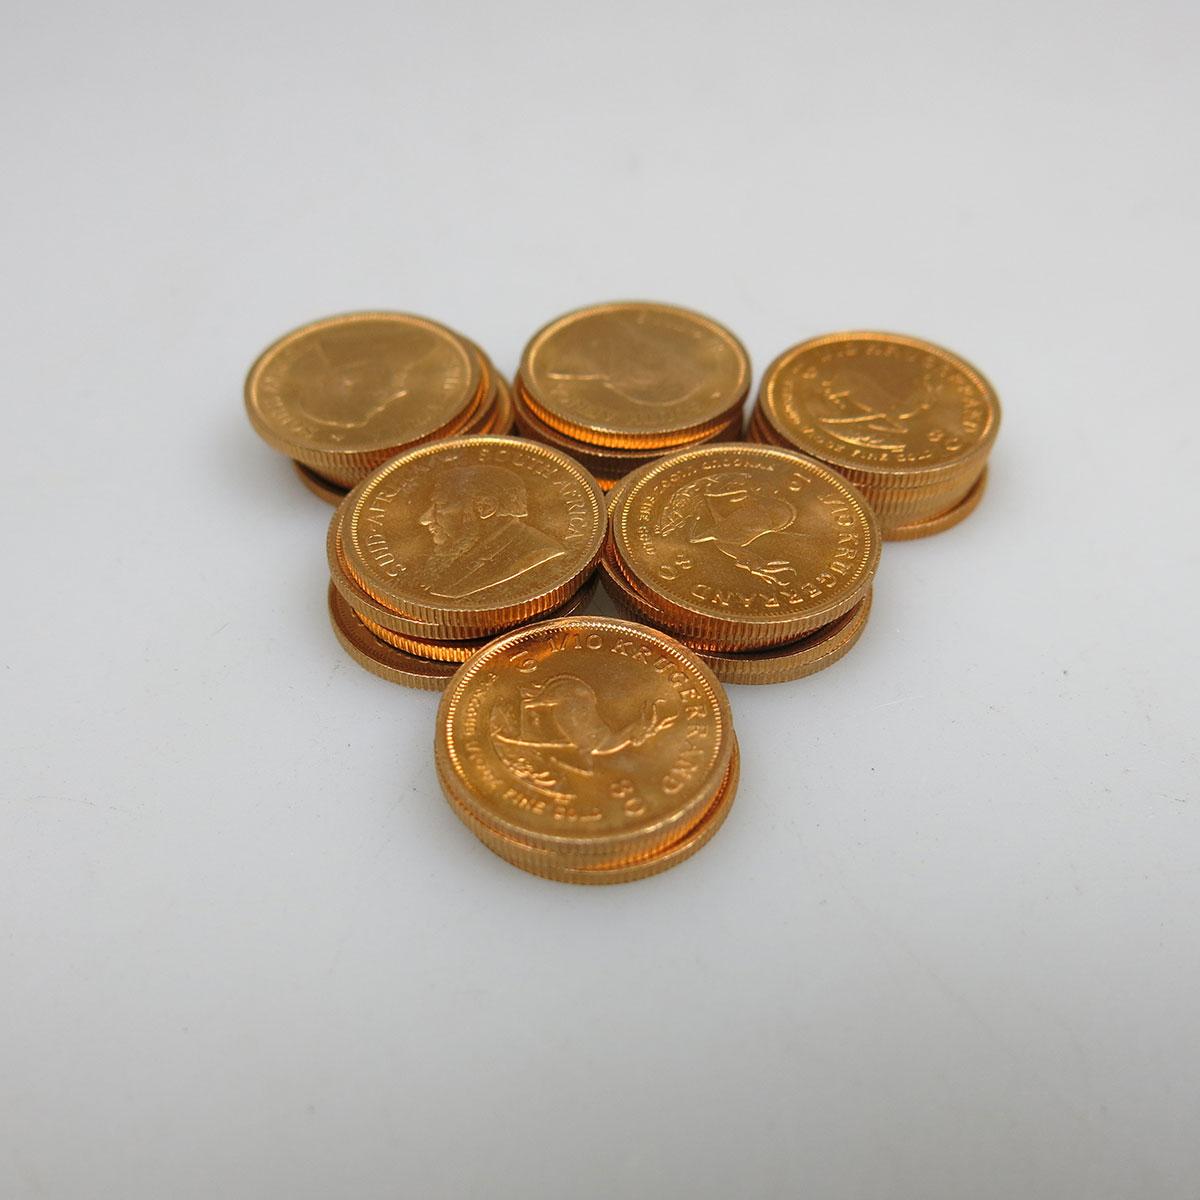 28 One-Tenth Krugerrand Gold Coins